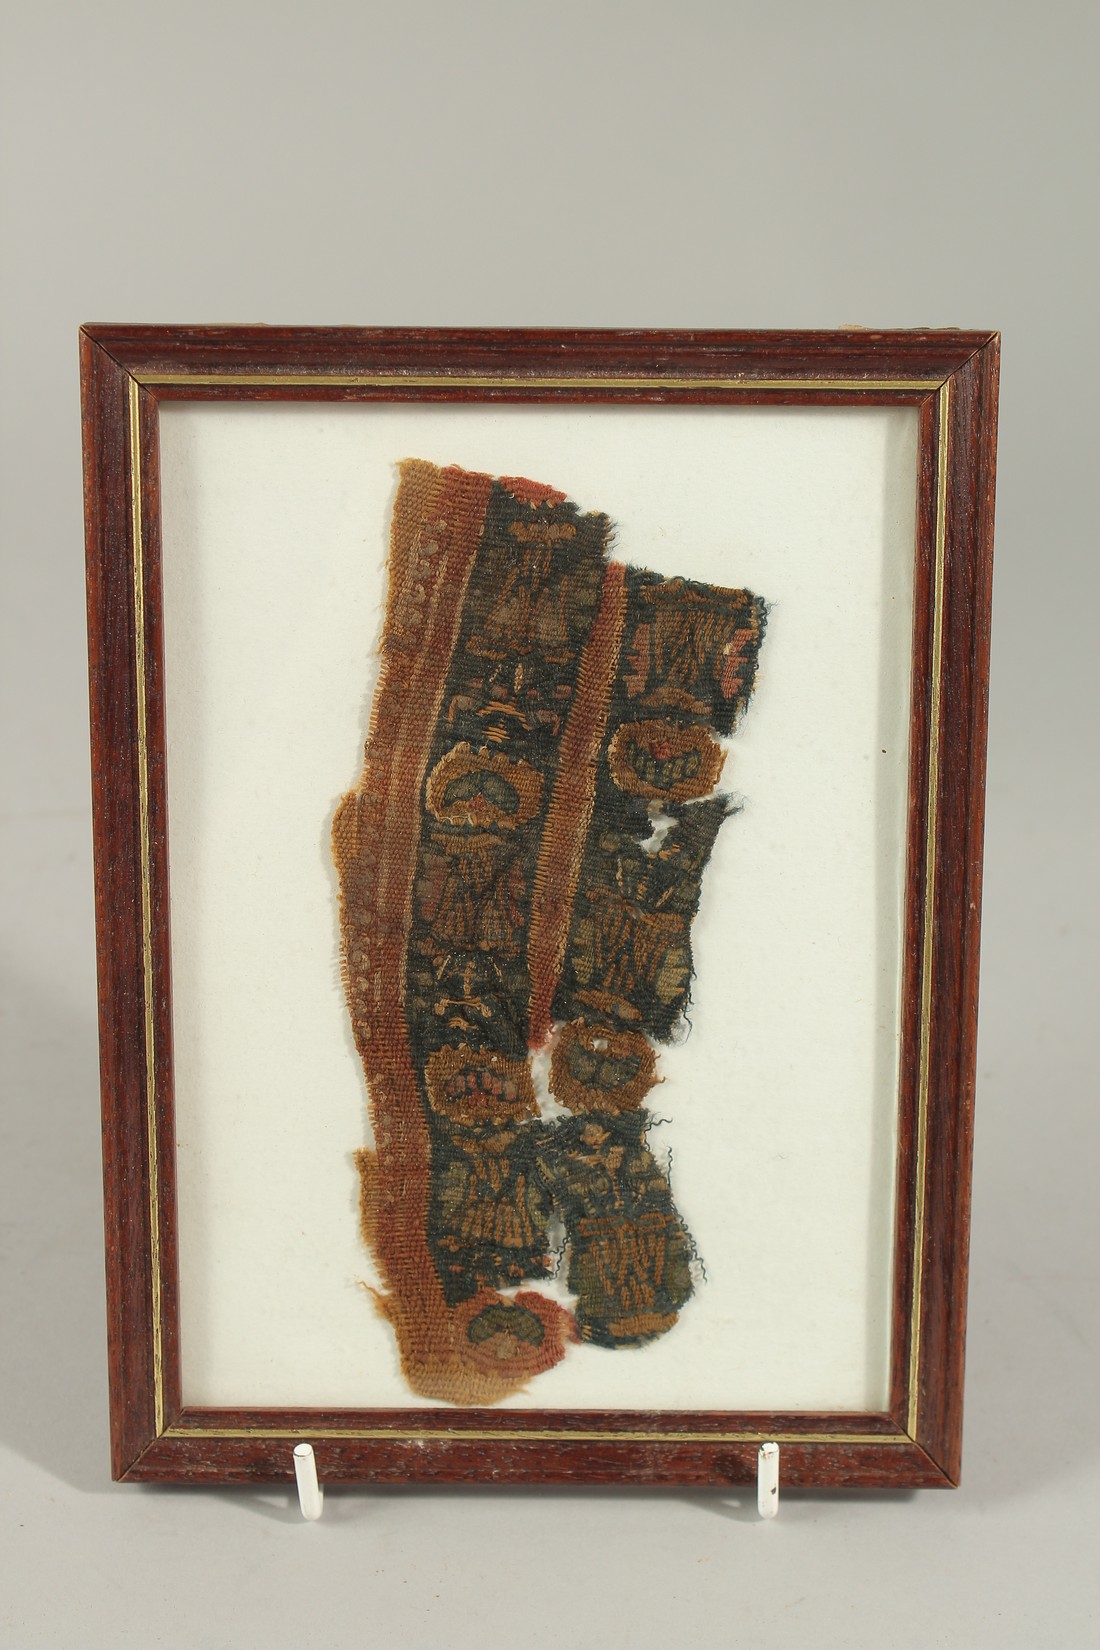 A 6TH CENTURY AD COPTIC EGYPT TEXTILE FRAGMENT, framed and glazed.